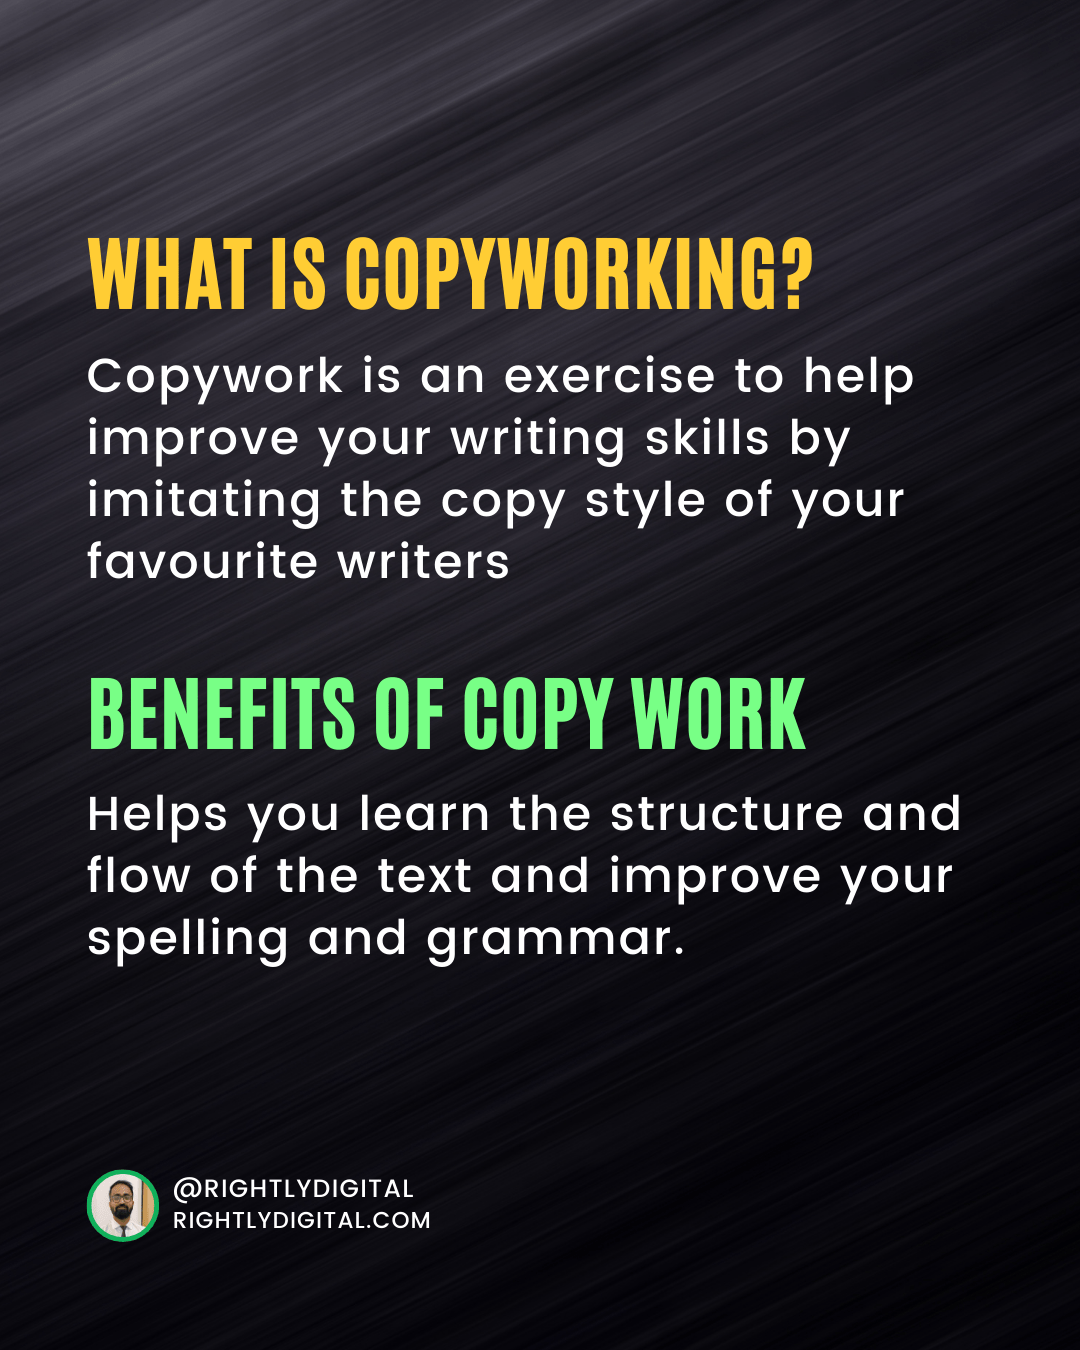 What is copyworking? Copywork is an exercise to help improve your writing skills by imitating the copy style of your favourite writers